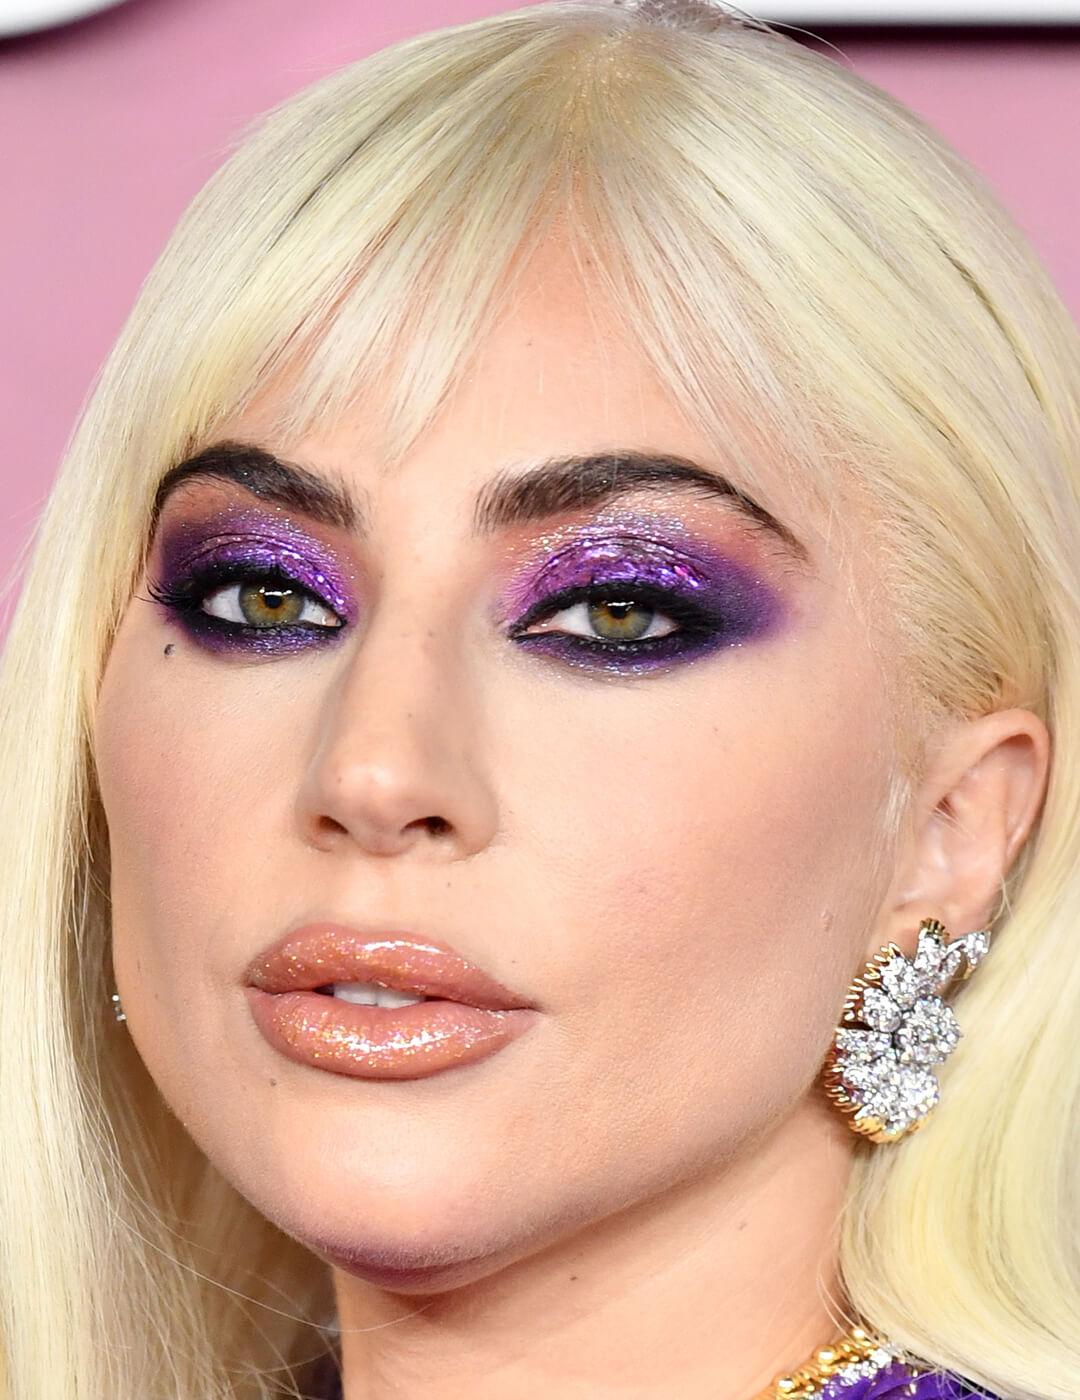 Lady Gaga rocking shimmery purple eyeshadow and glossy lips on the red carpet